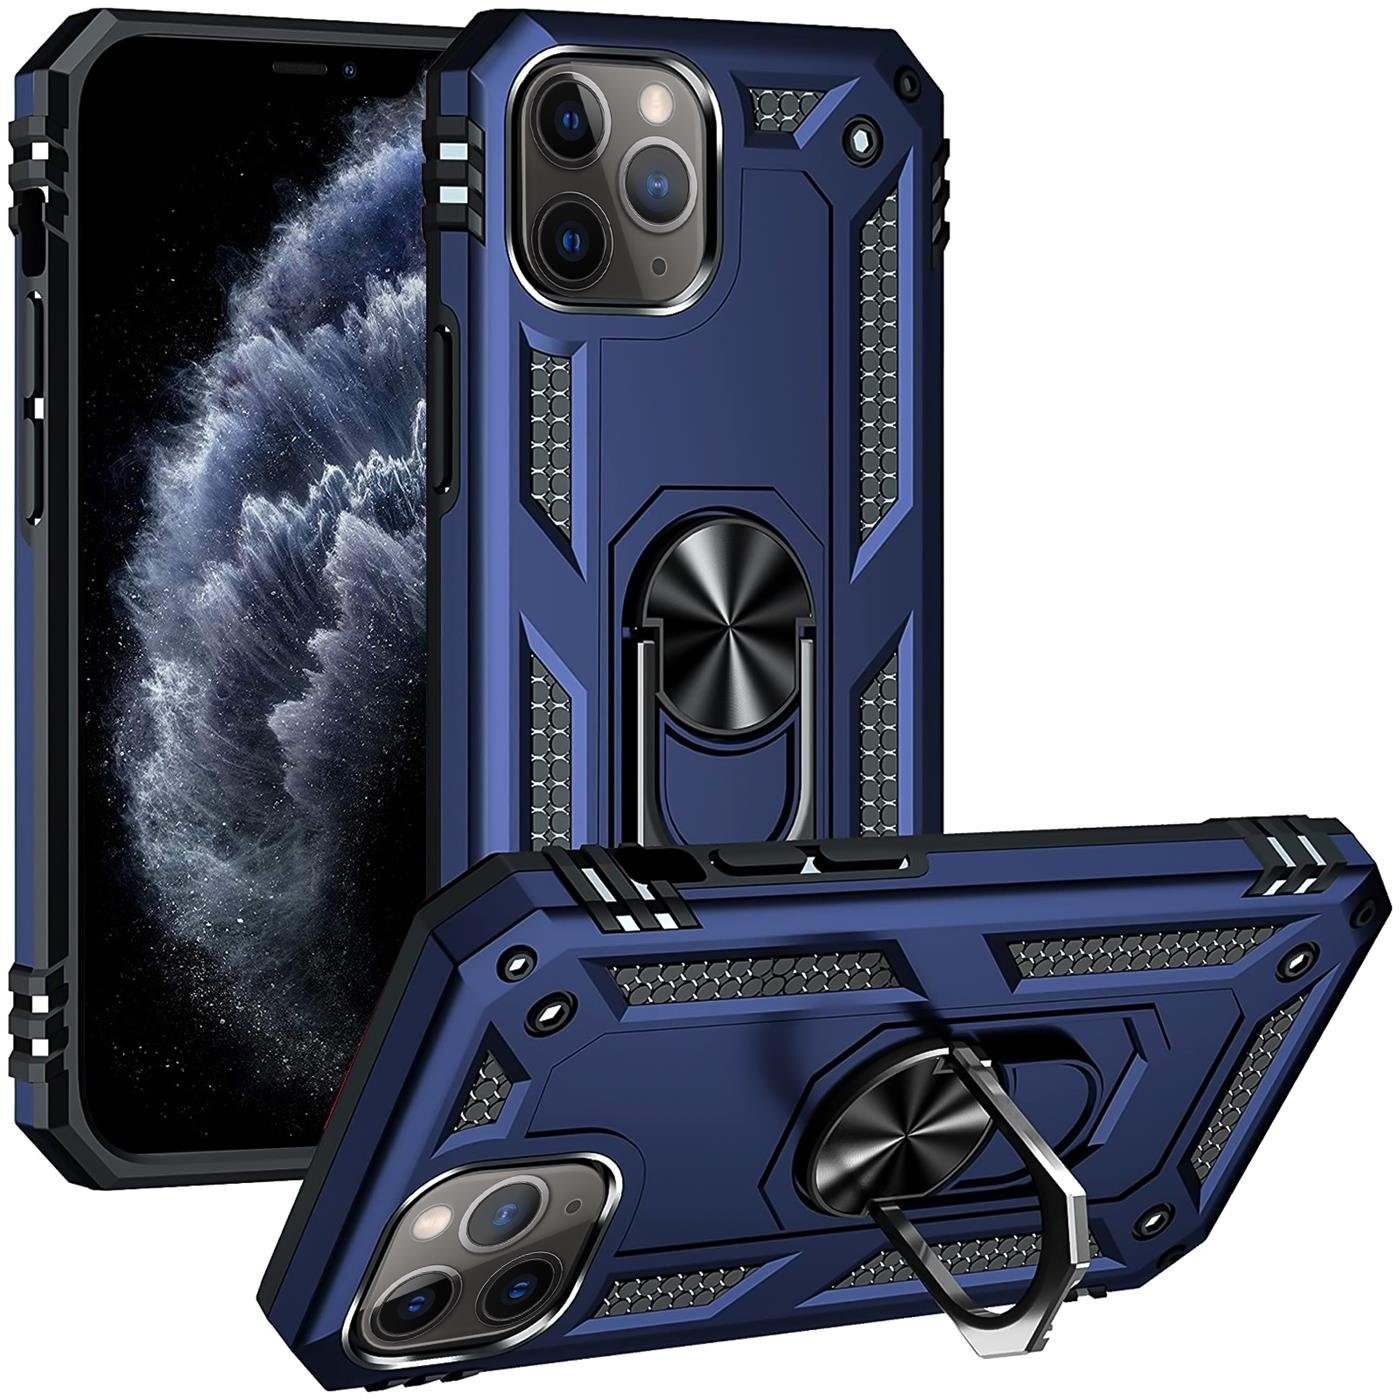 CoolGadget Handyhülle Armor Shield Case für Apple iPhone 11 Pro 5,8 Zoll,  Outdoor Cover mit Magnet Ringhalterung Handy Hülle für iPhone 11 Pro